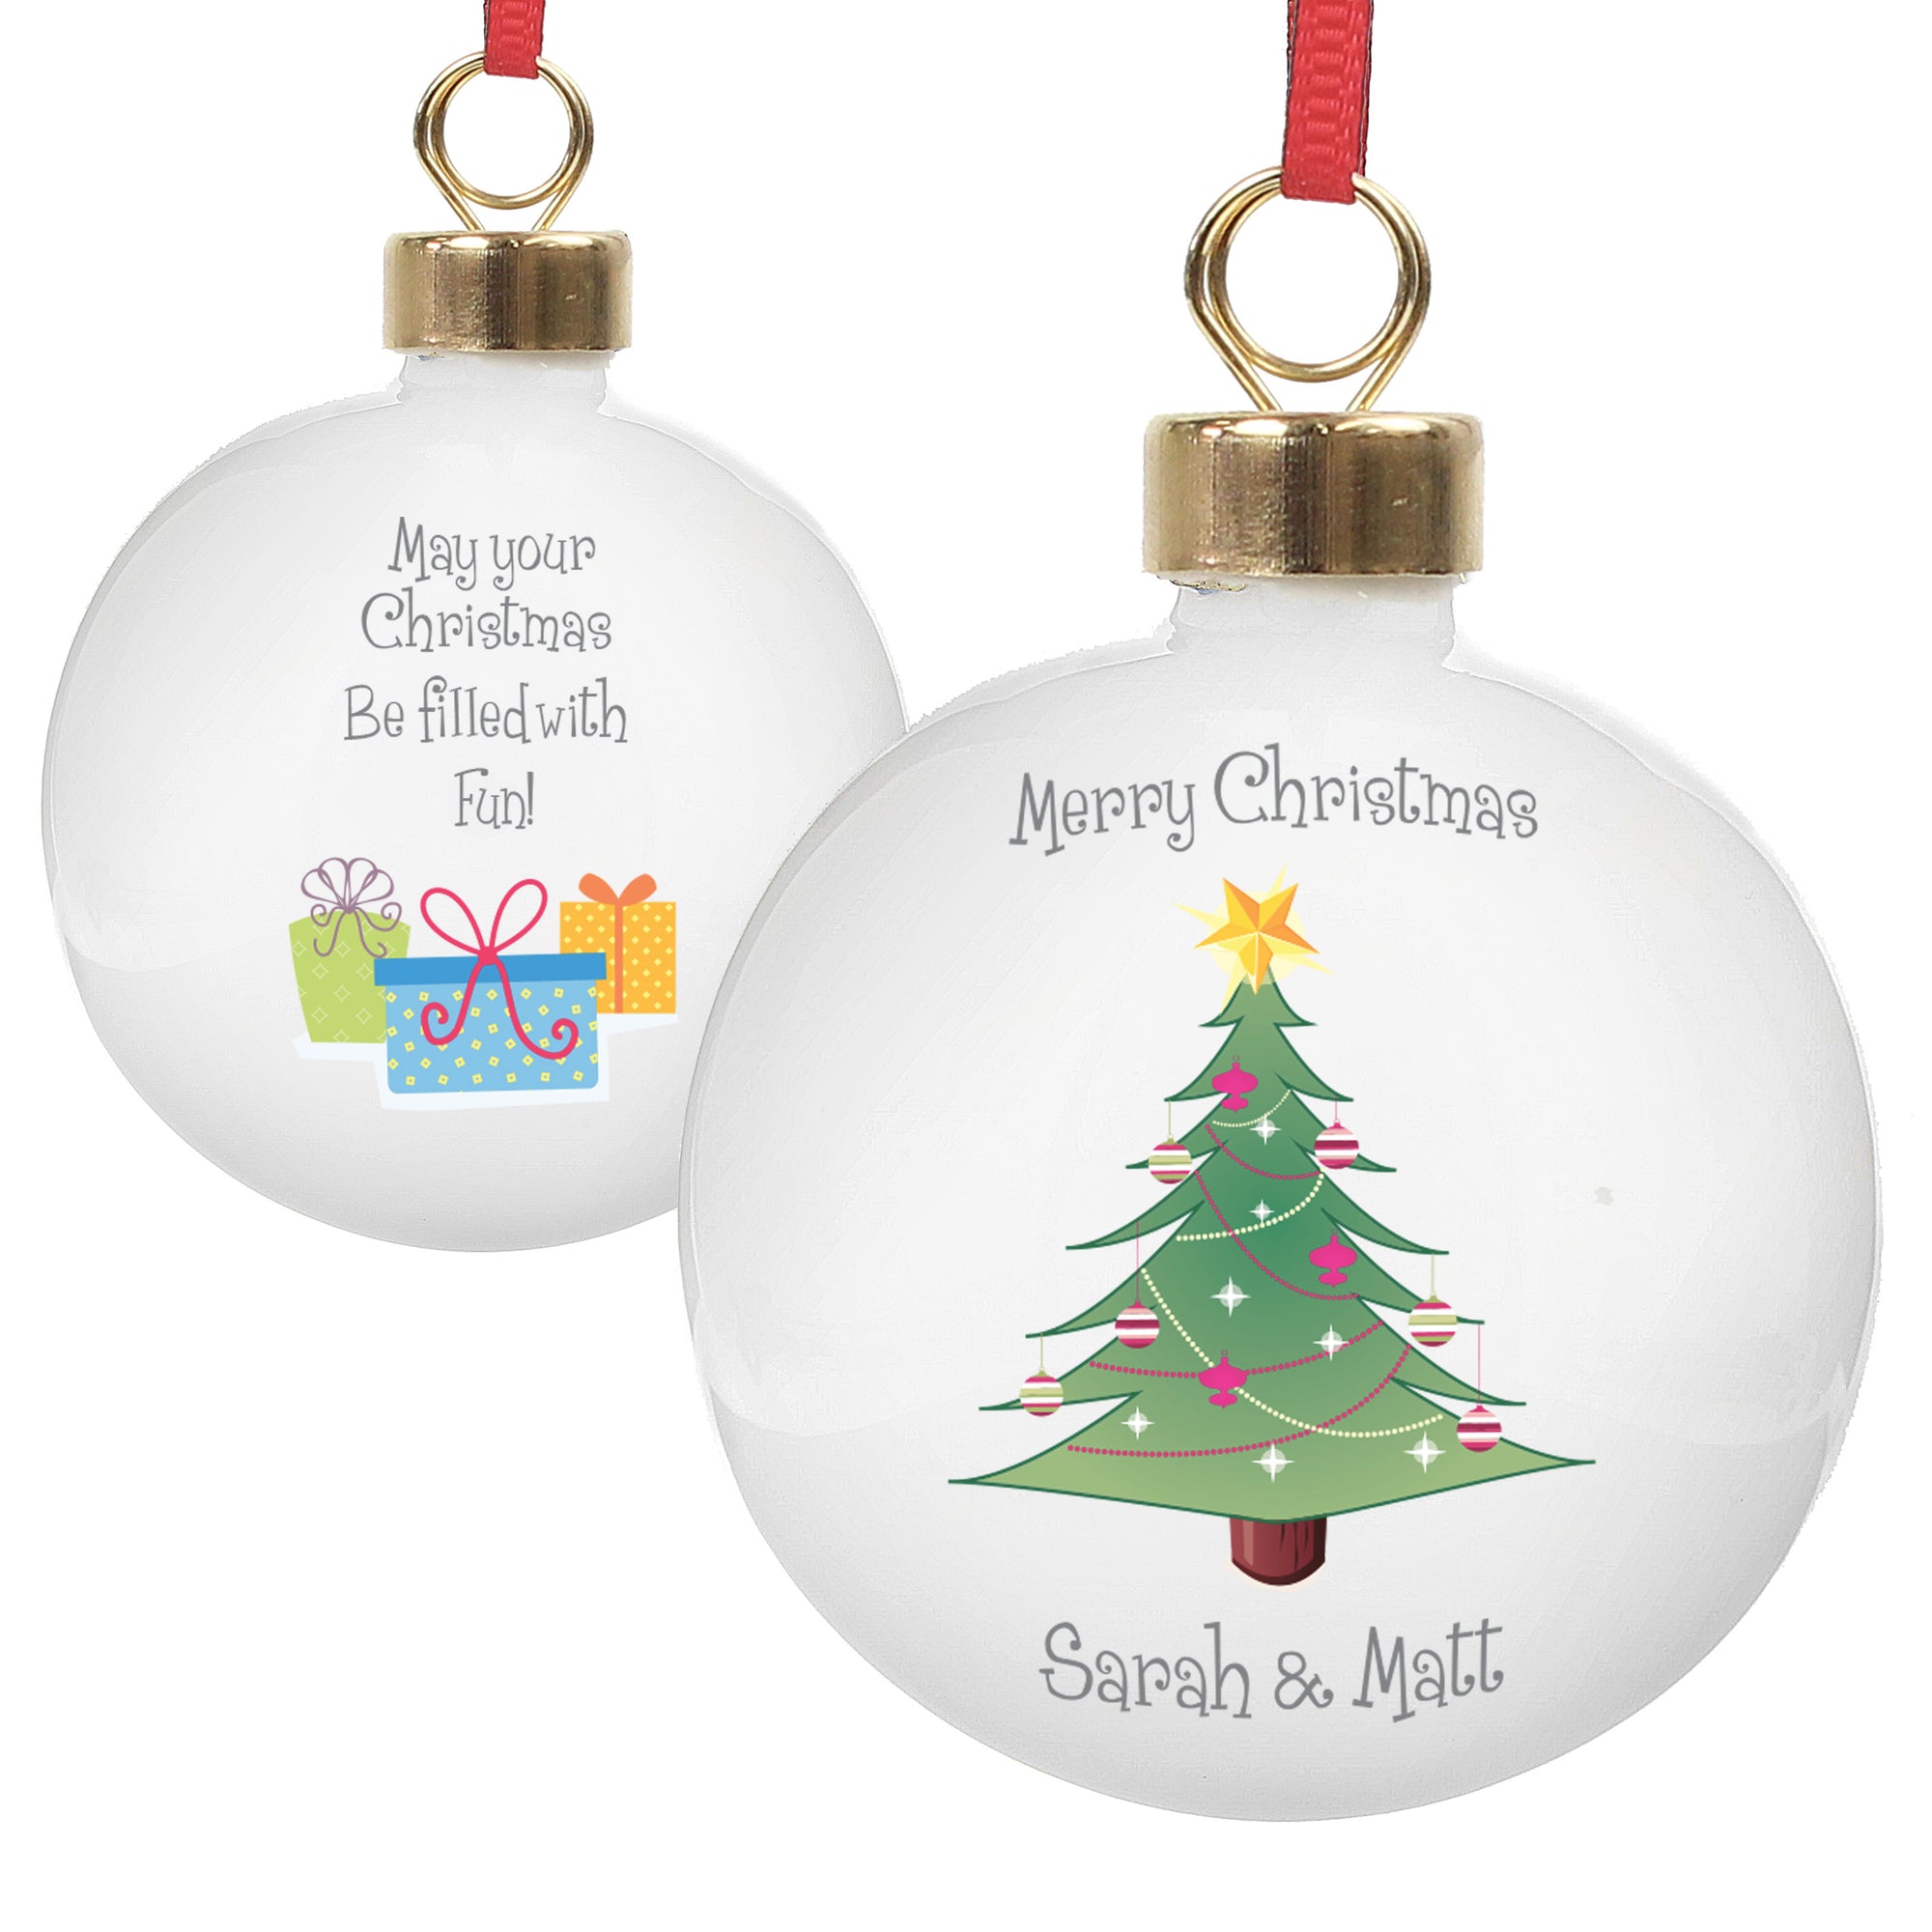 Personalised round white ceramic Christmas tree bauble featuring a drawing of a Christmas tree on the front. The bauble can be personalised with two lines of your own text on the front of the bauble, one line above the tree and the other line below the tree. You can also add your own message over up to 4 lines on the back.